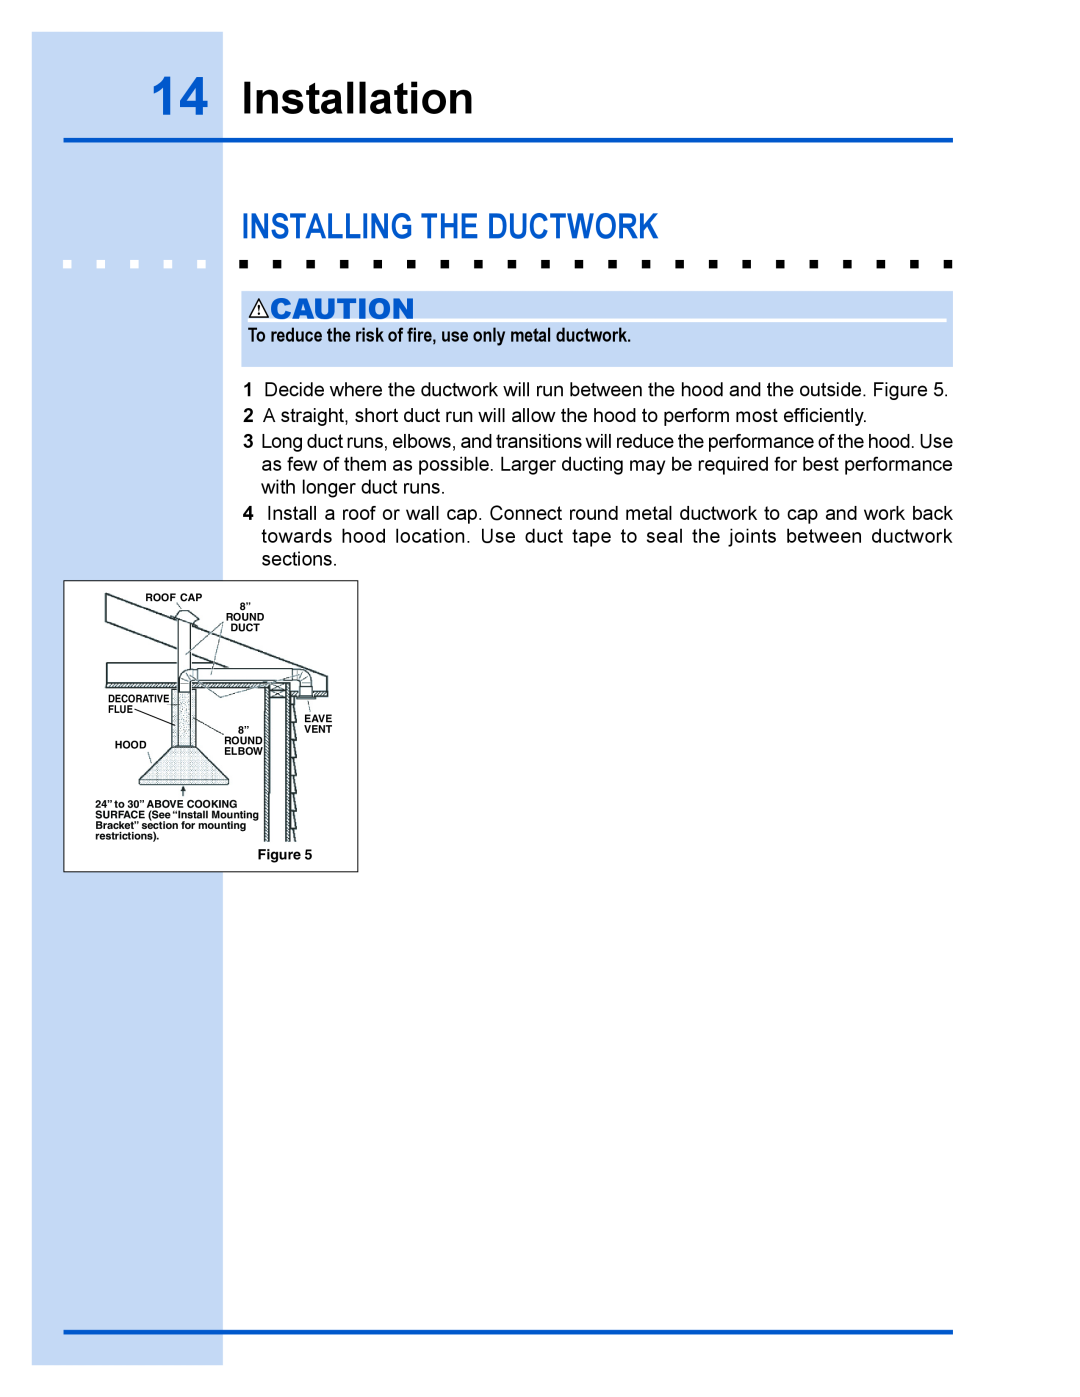 Electrolux E40PV100FS installation instructions Installation, Installing The Ductwork 